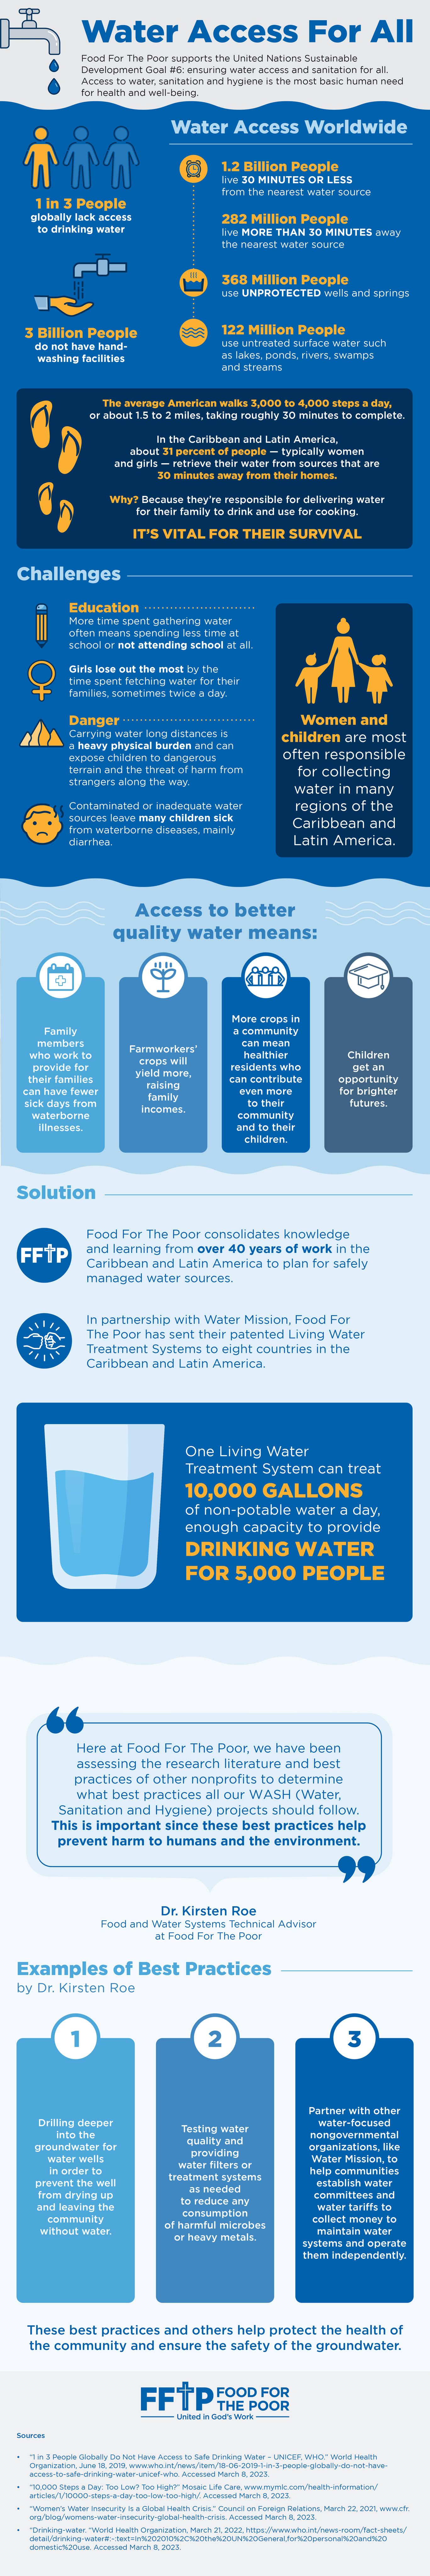 water access infographic